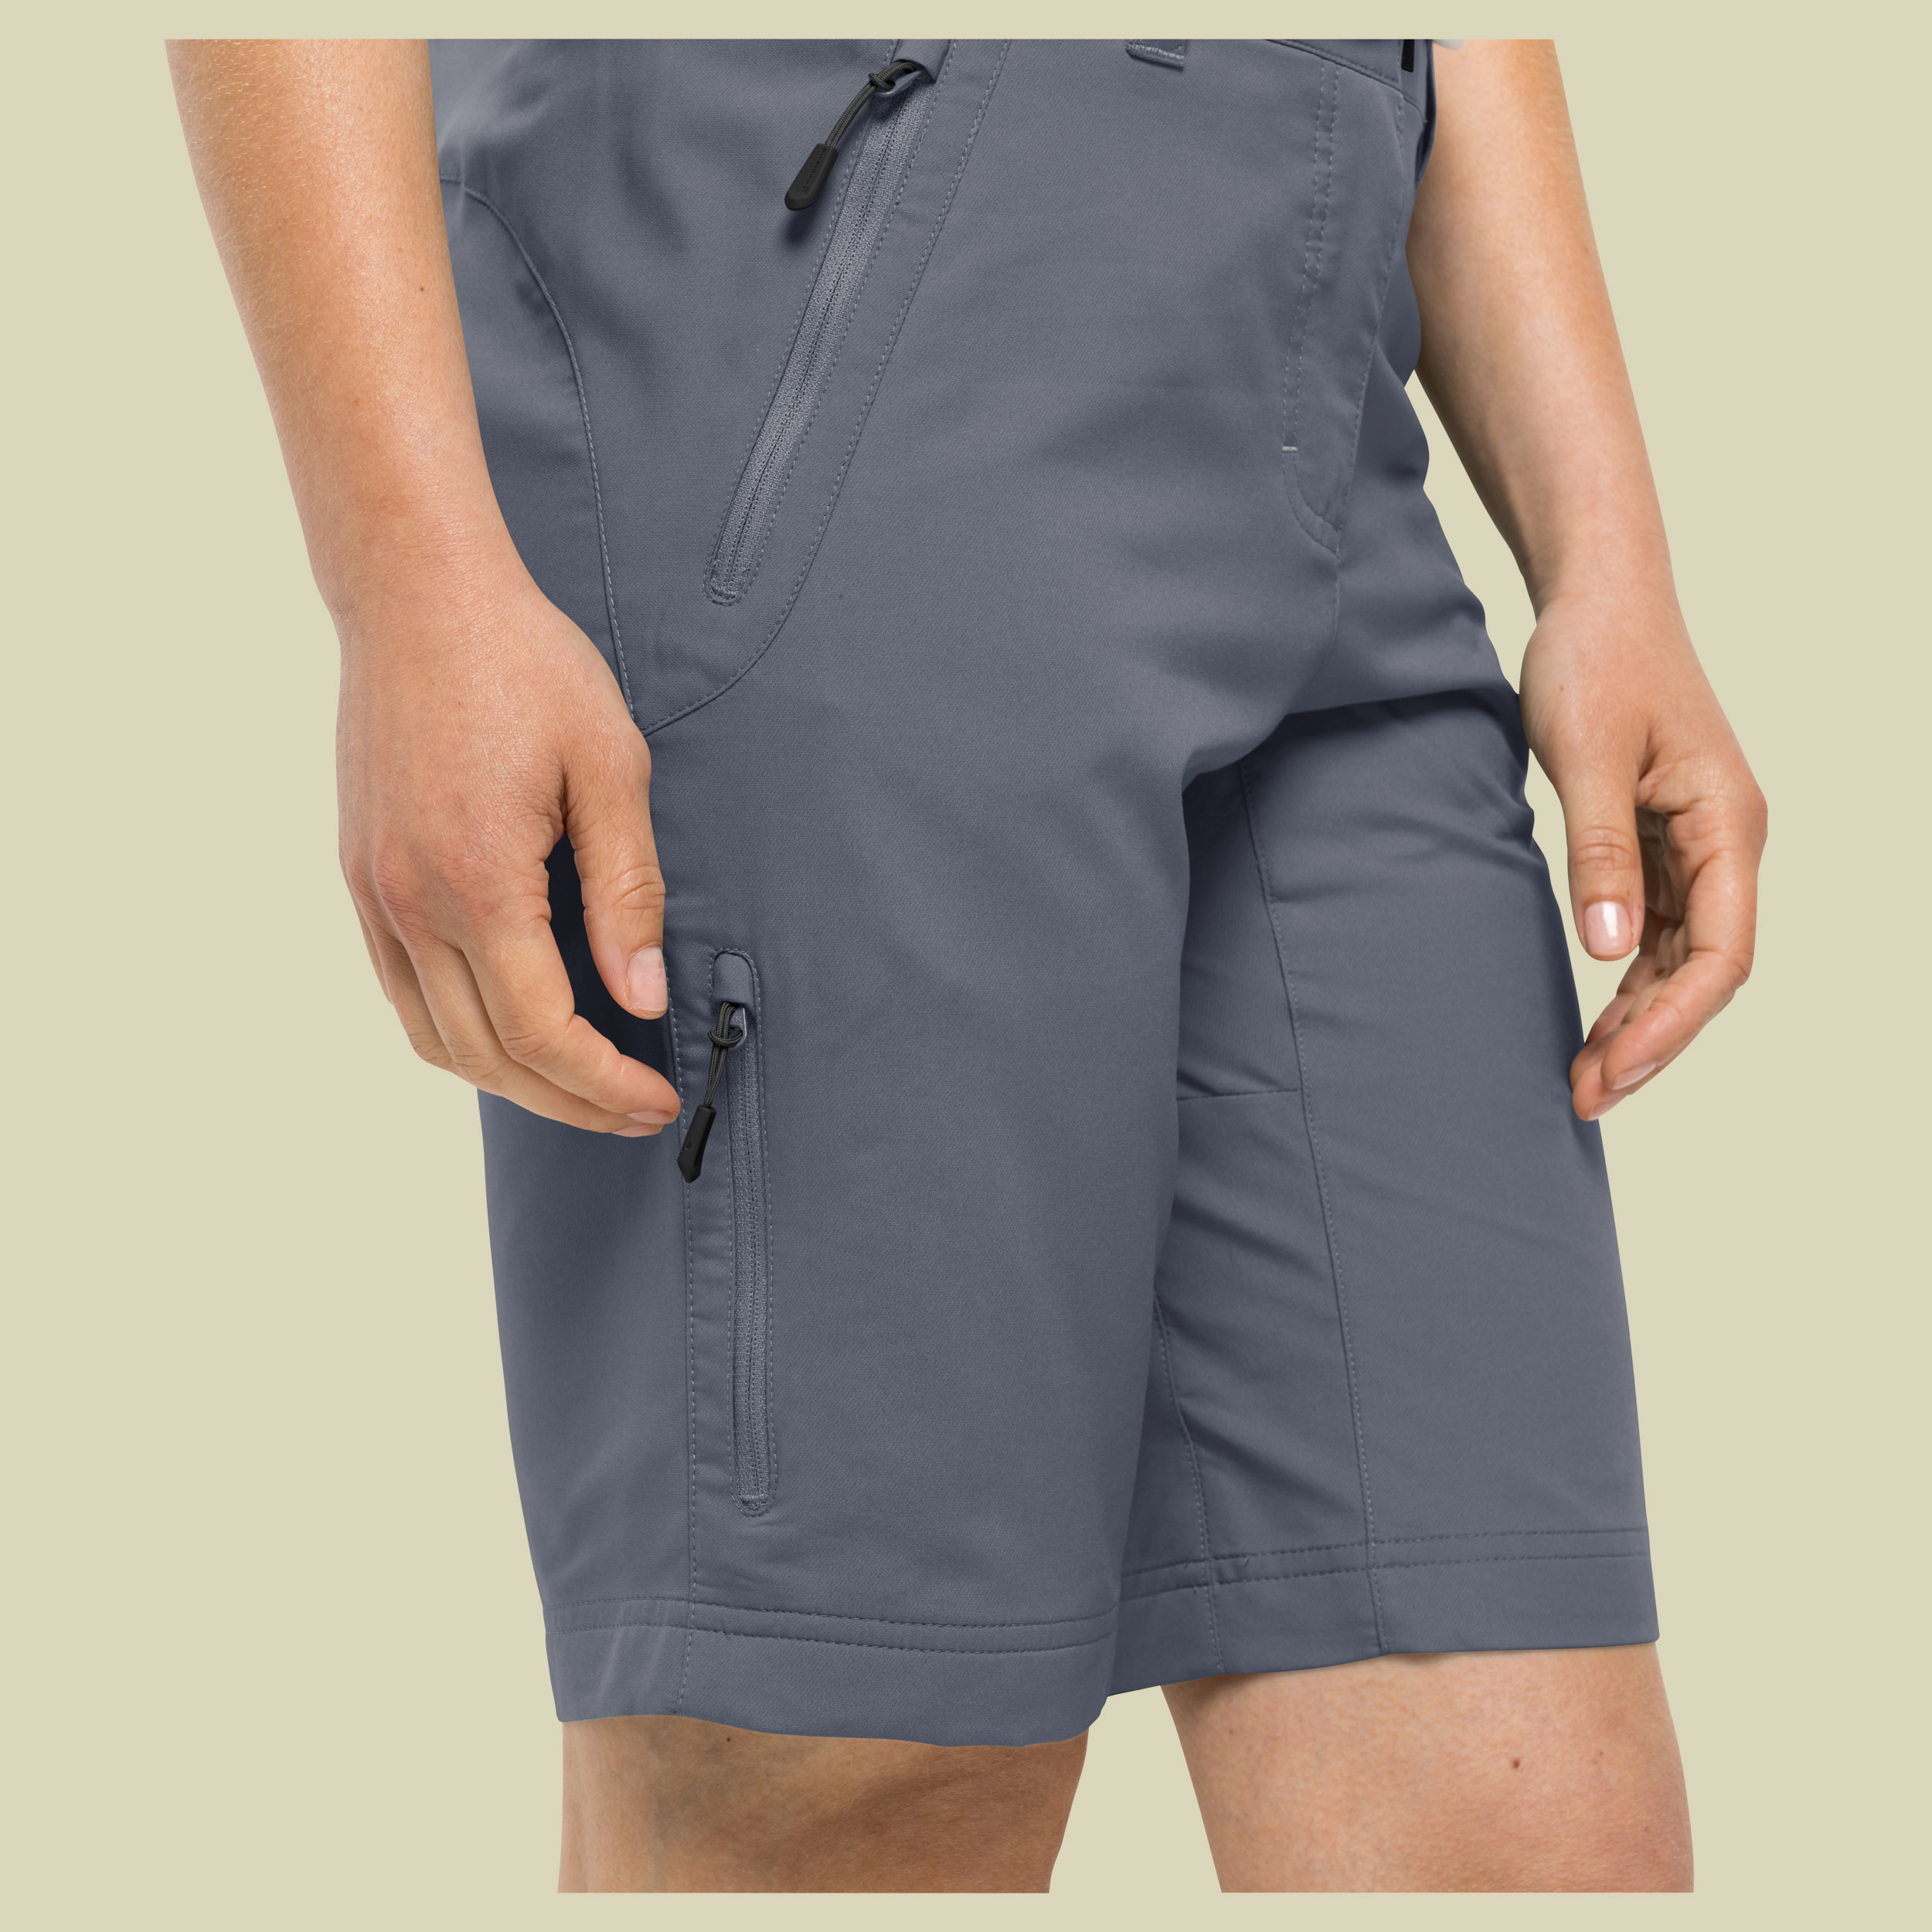 Activate Track Shorts Women Größe 44 Farbe dolphin